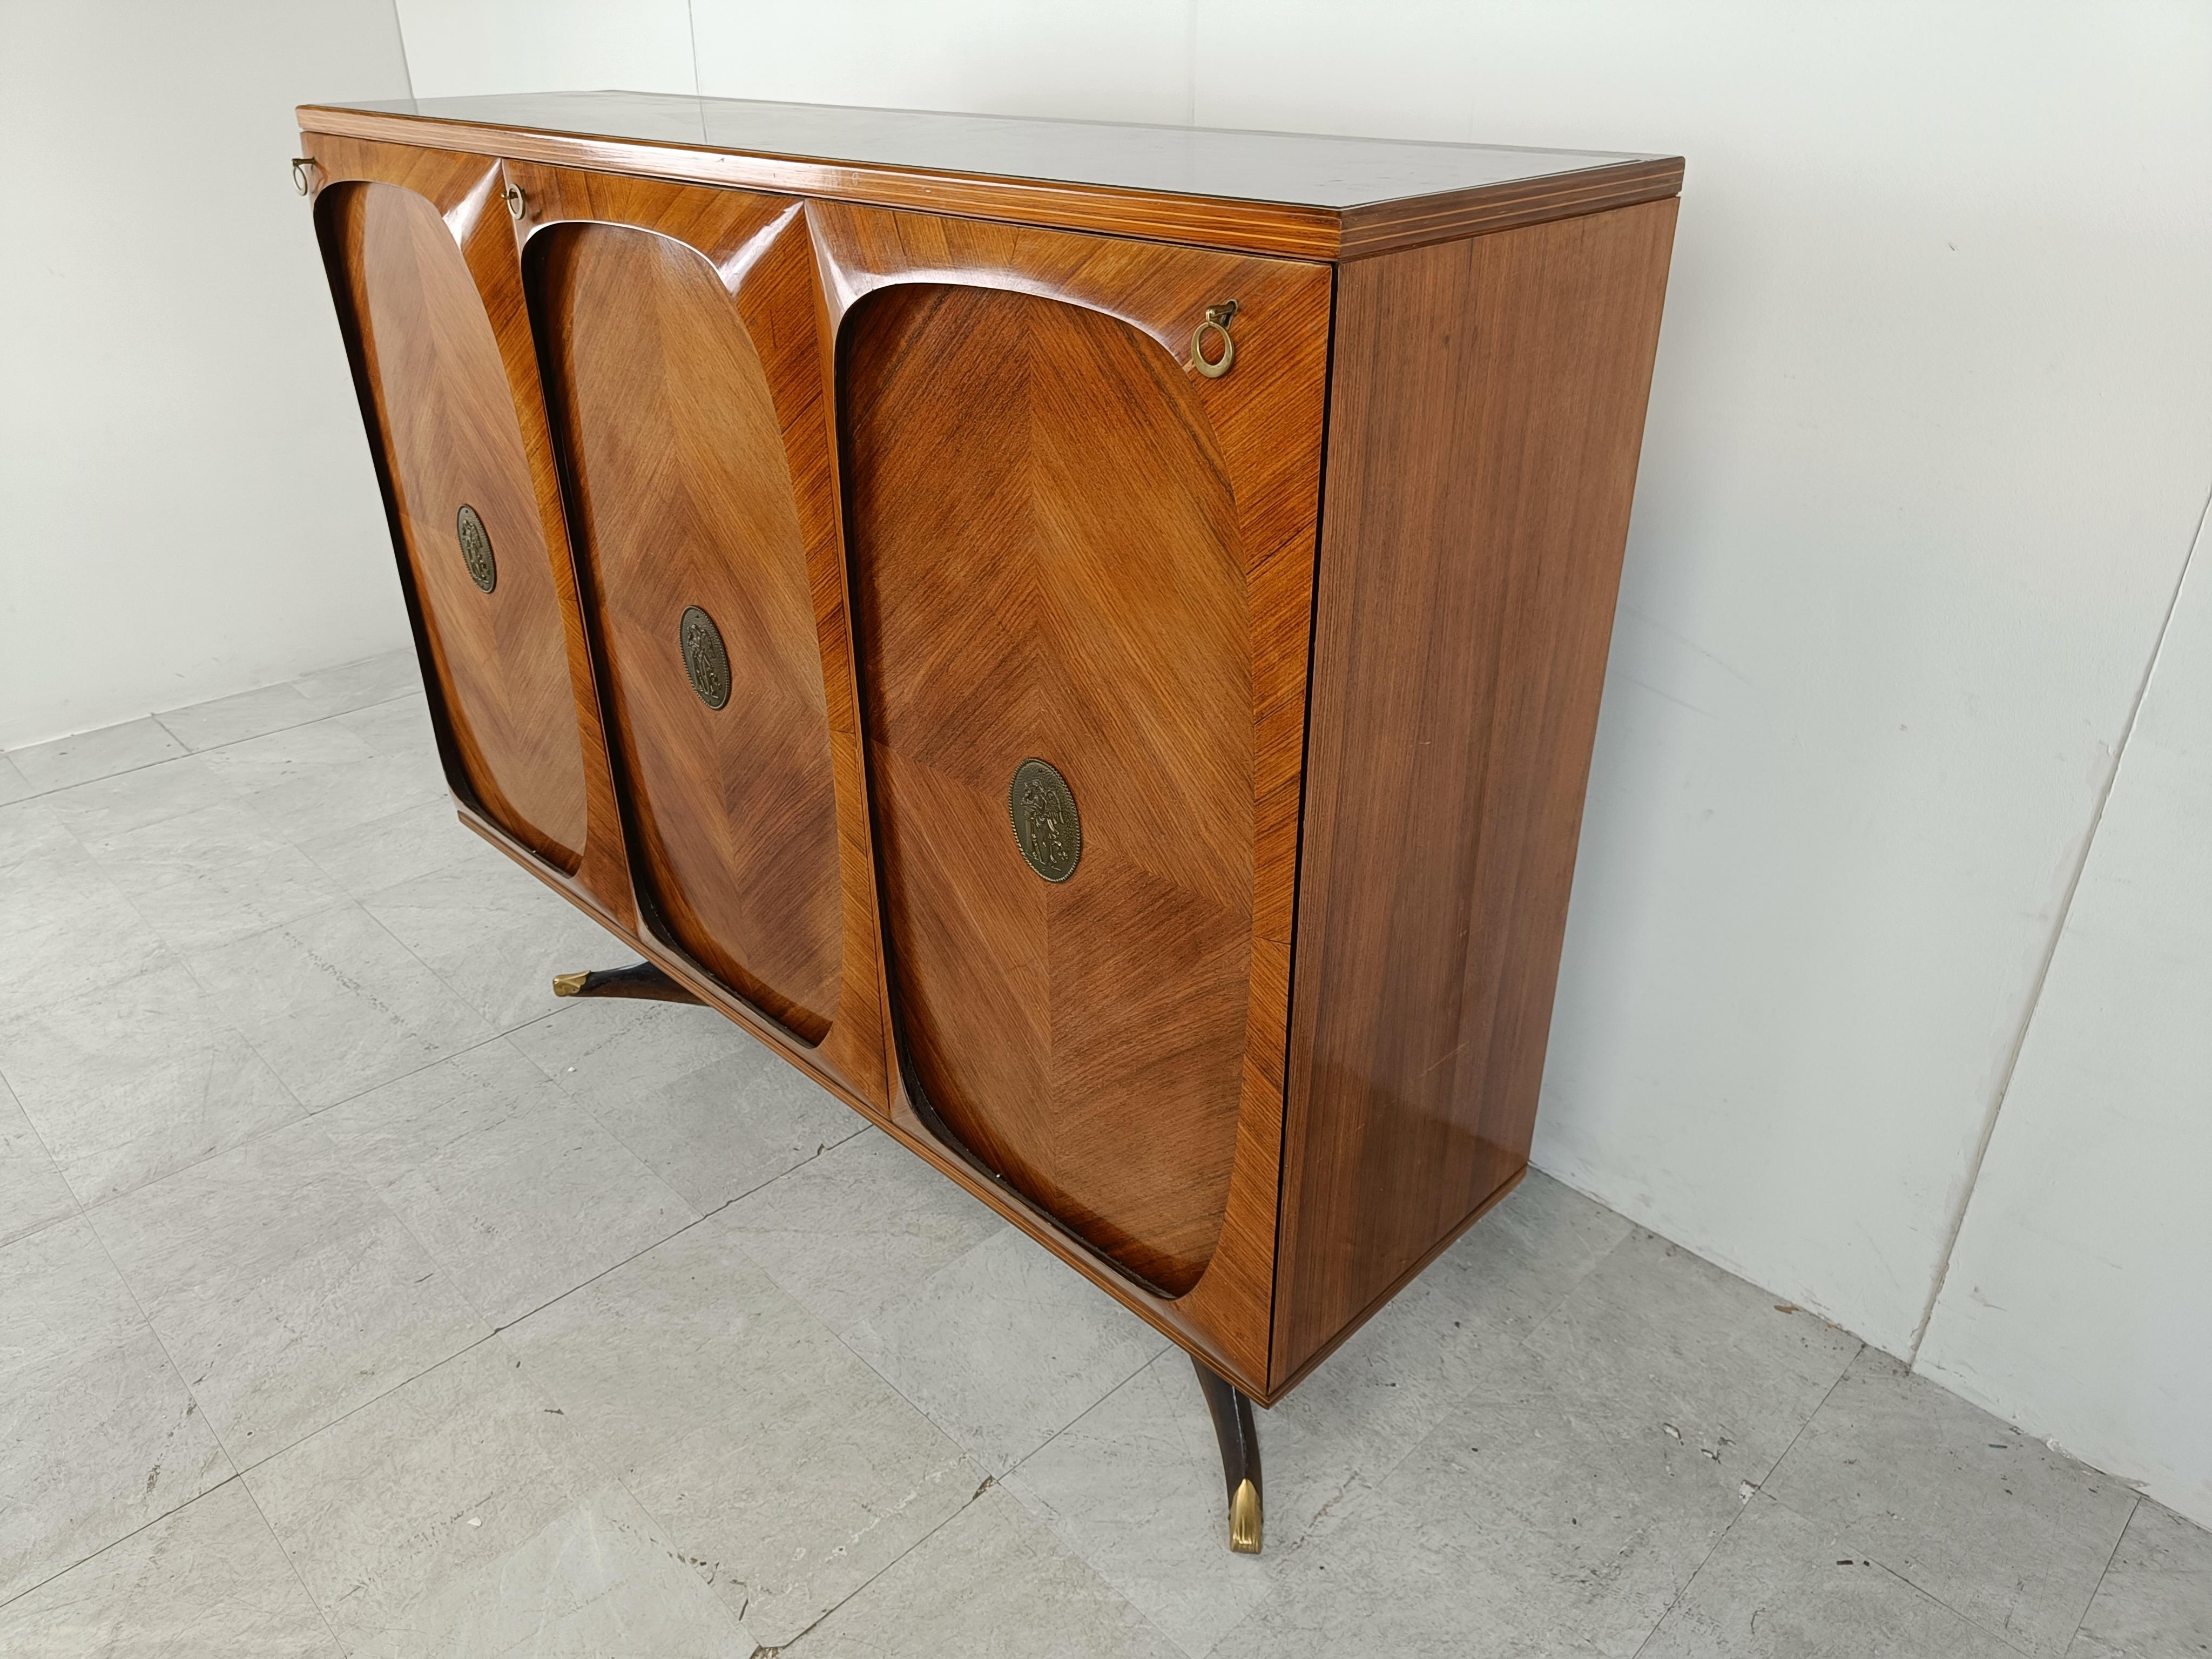 Italian Rosewood Highboard by Vittorio Dassi for Lissone, 1950s For Sale 7